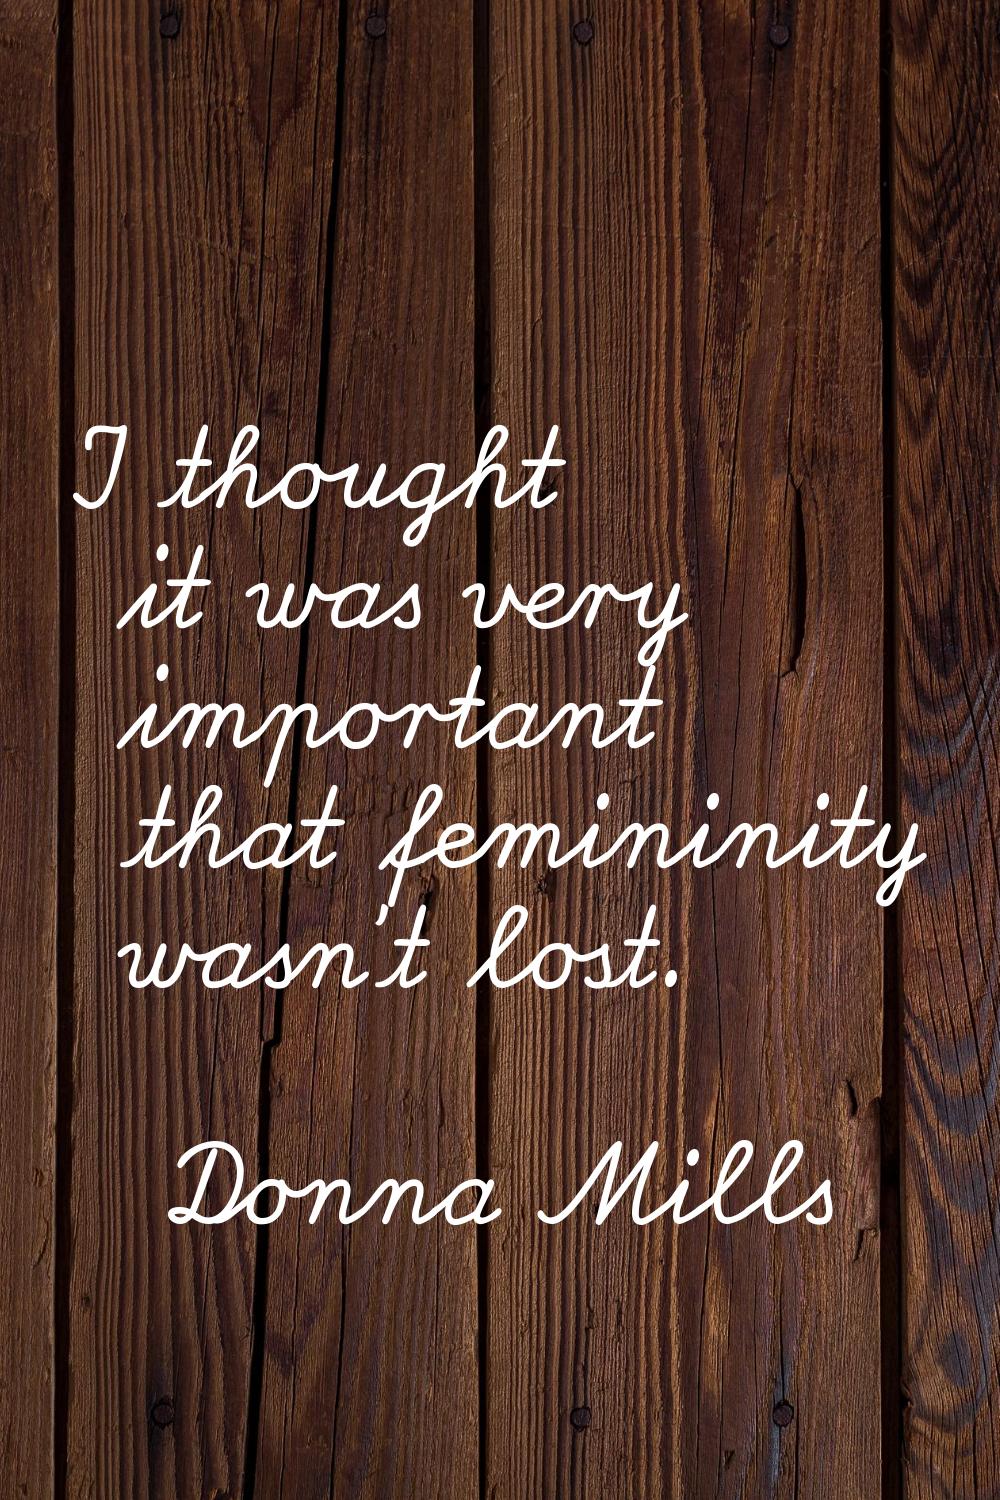 I thought it was very important that femininity wasn't lost.